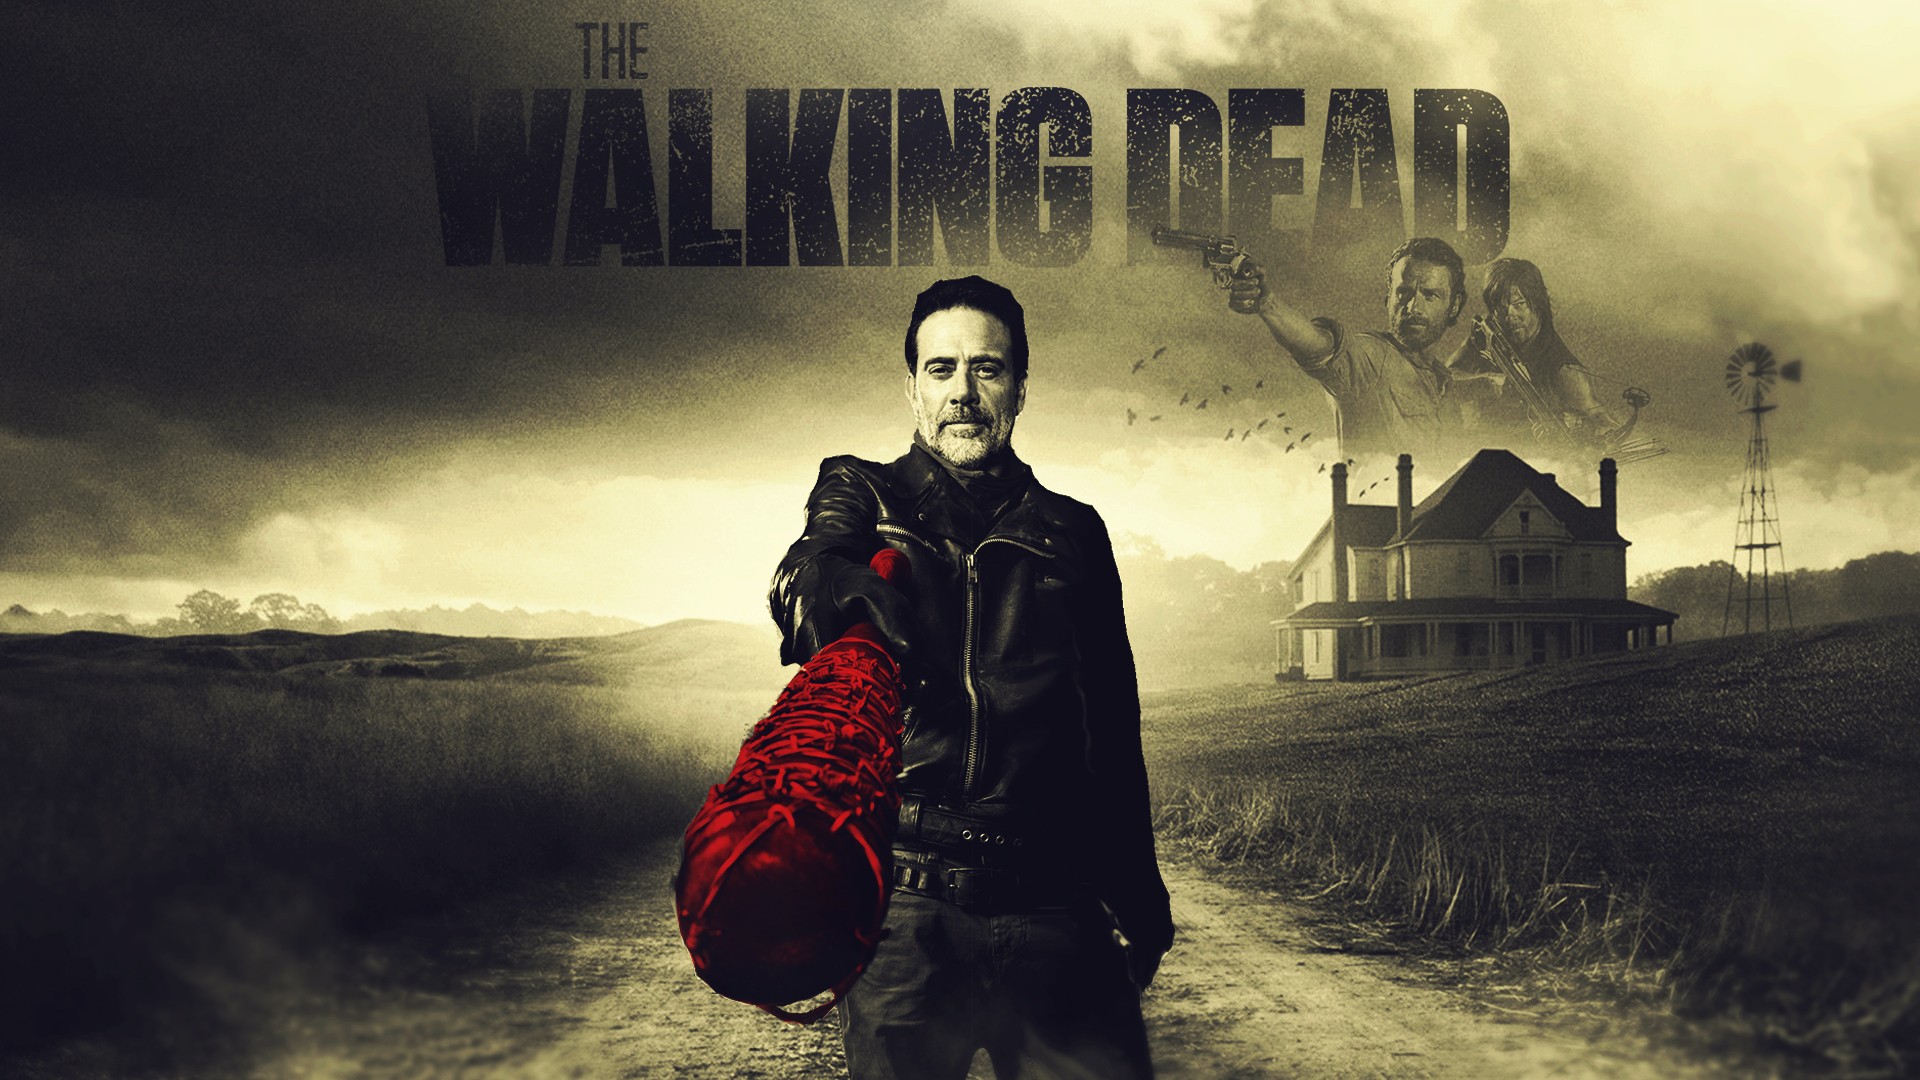 Negan wallpaper ·① Download free stunning full HD backgrounds for